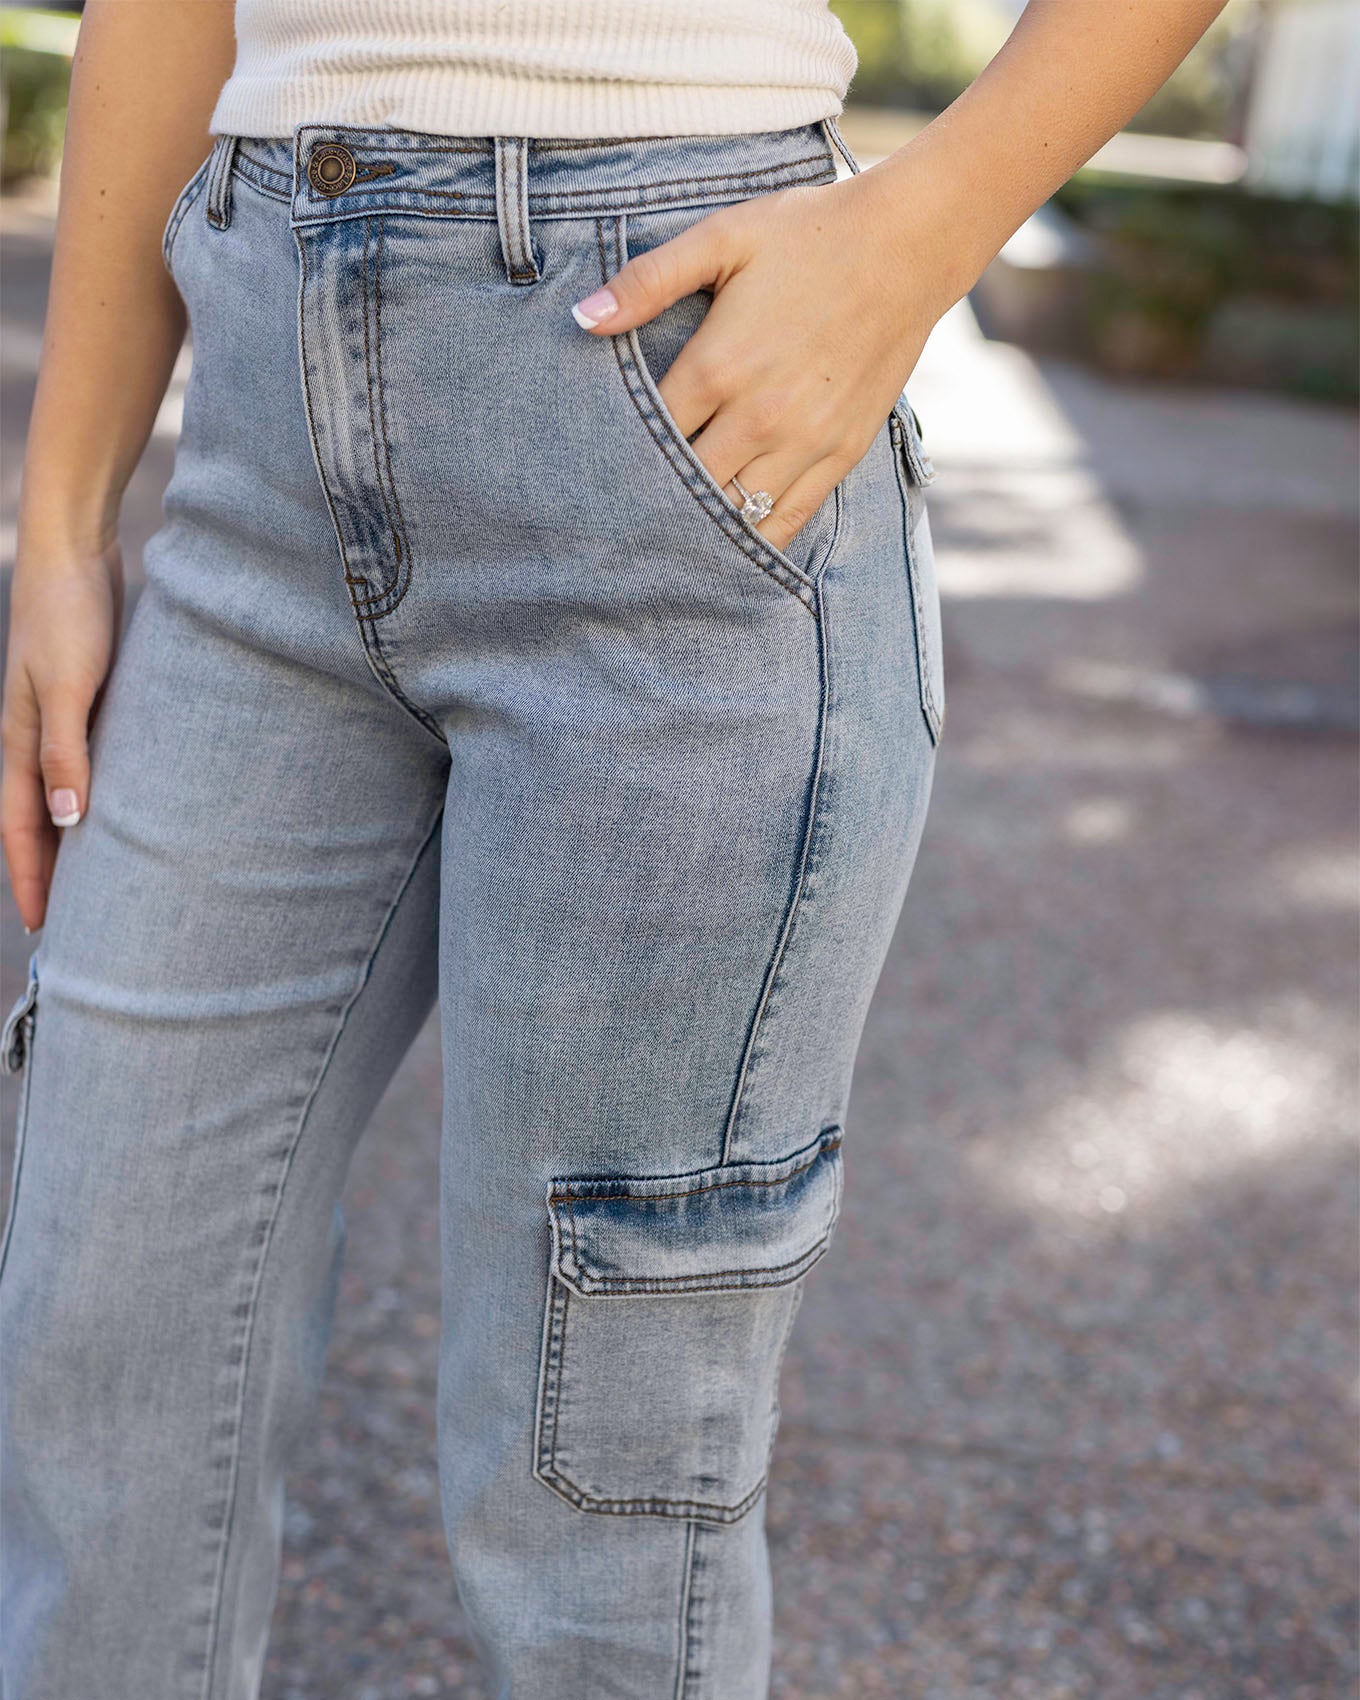 detail view of cargo jeans